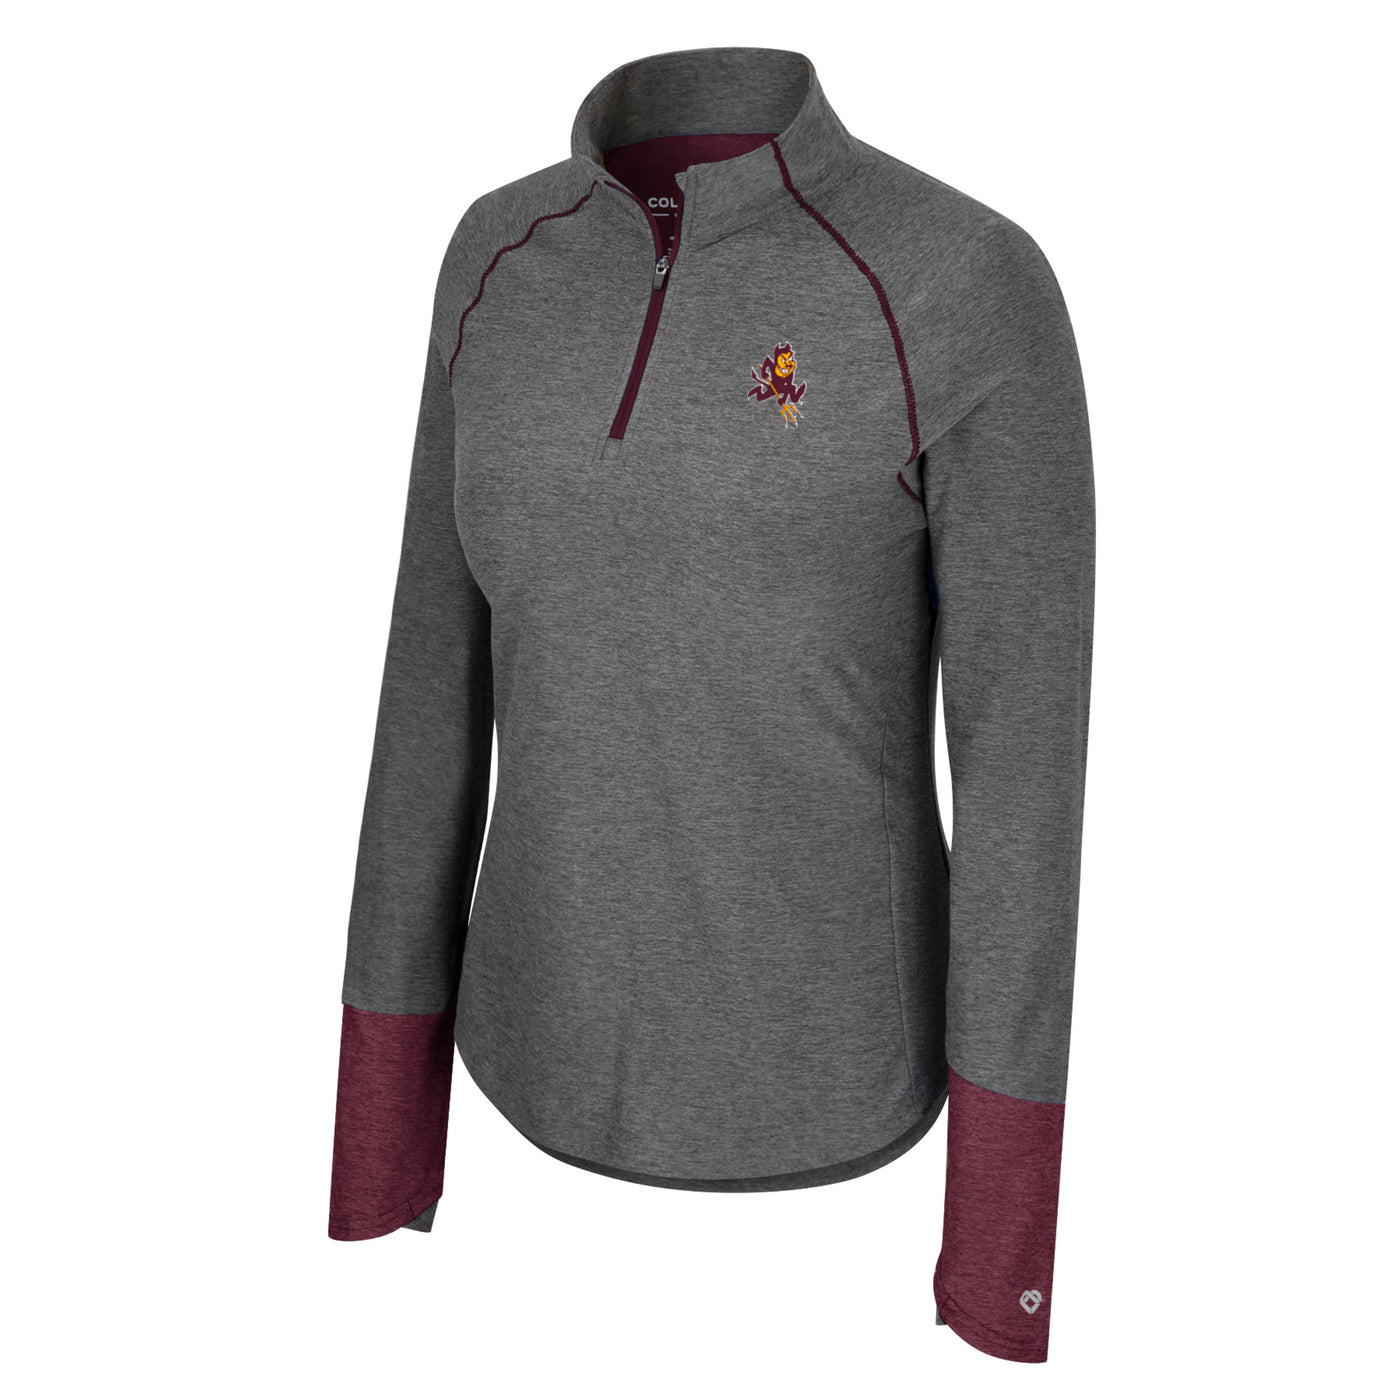 ASU grey ladies 1/4 zip with maroon trim and maroon at the bottem of the sleeves.Small sparky mascot logo on one side of the chest.